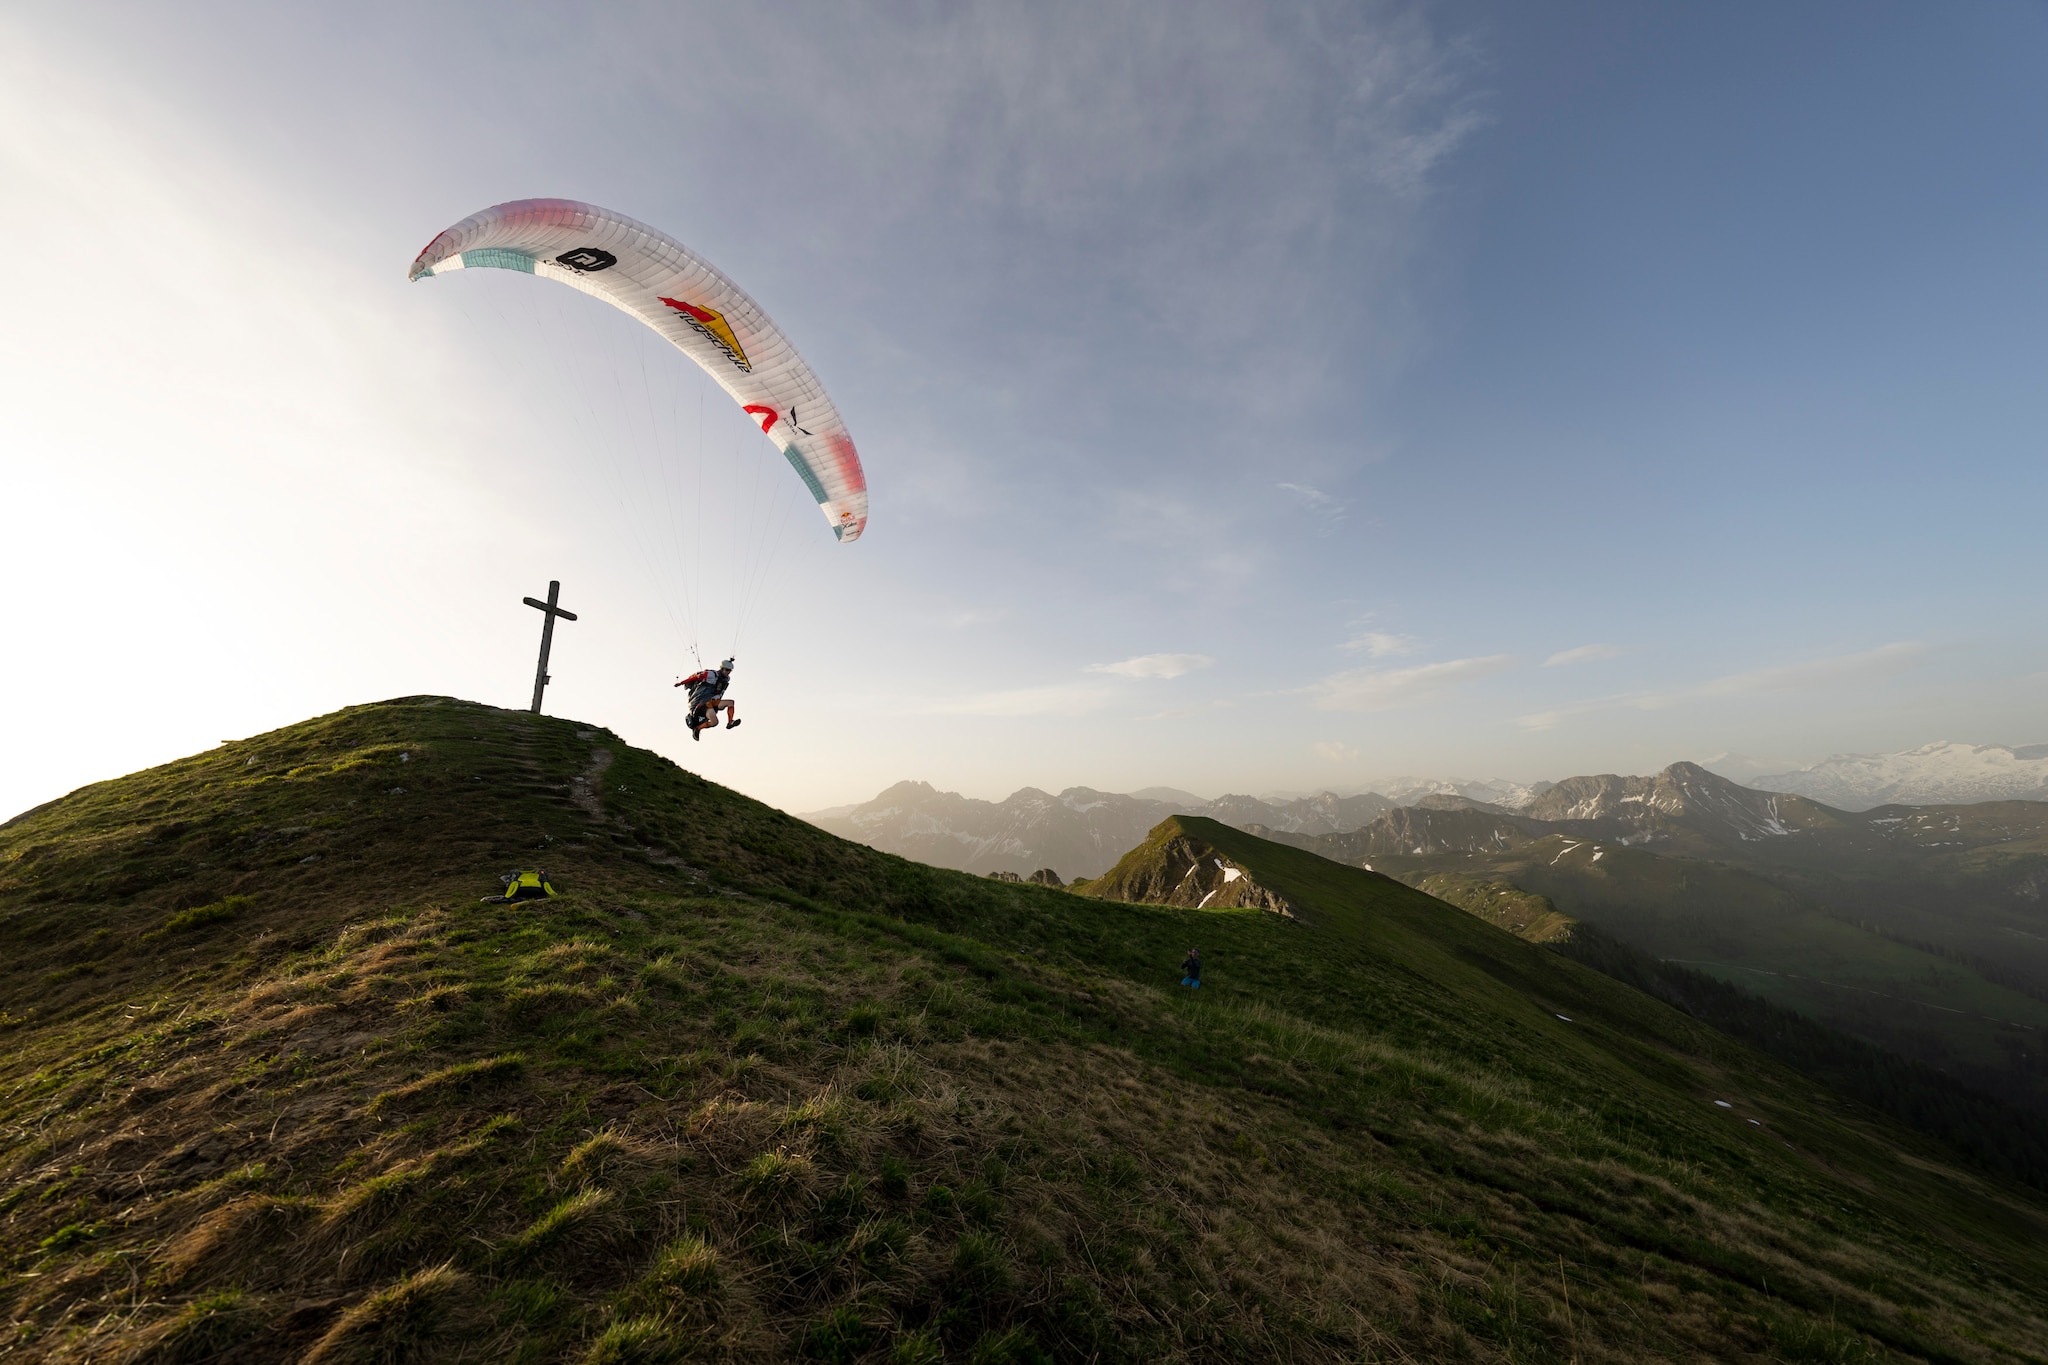 AUT2 performs during the Red Bull X-Alps in Kleinarl, Austria on June 21, 2021.